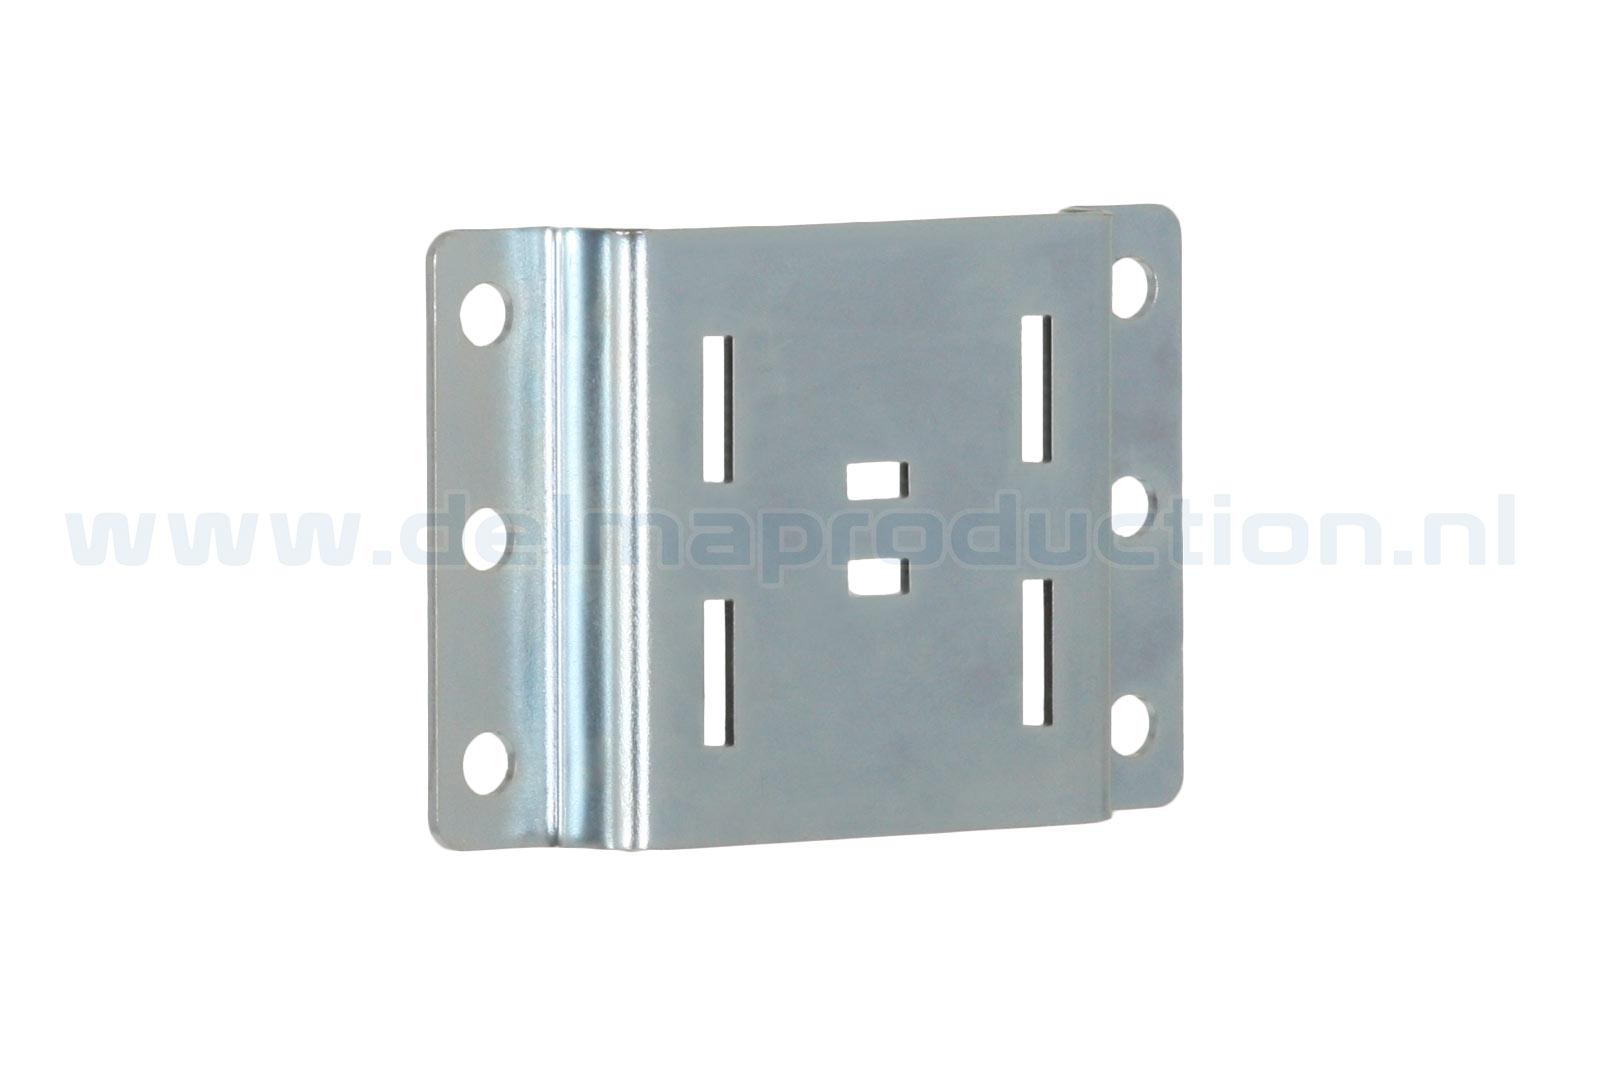 Quick release stadard mounting plate (1)